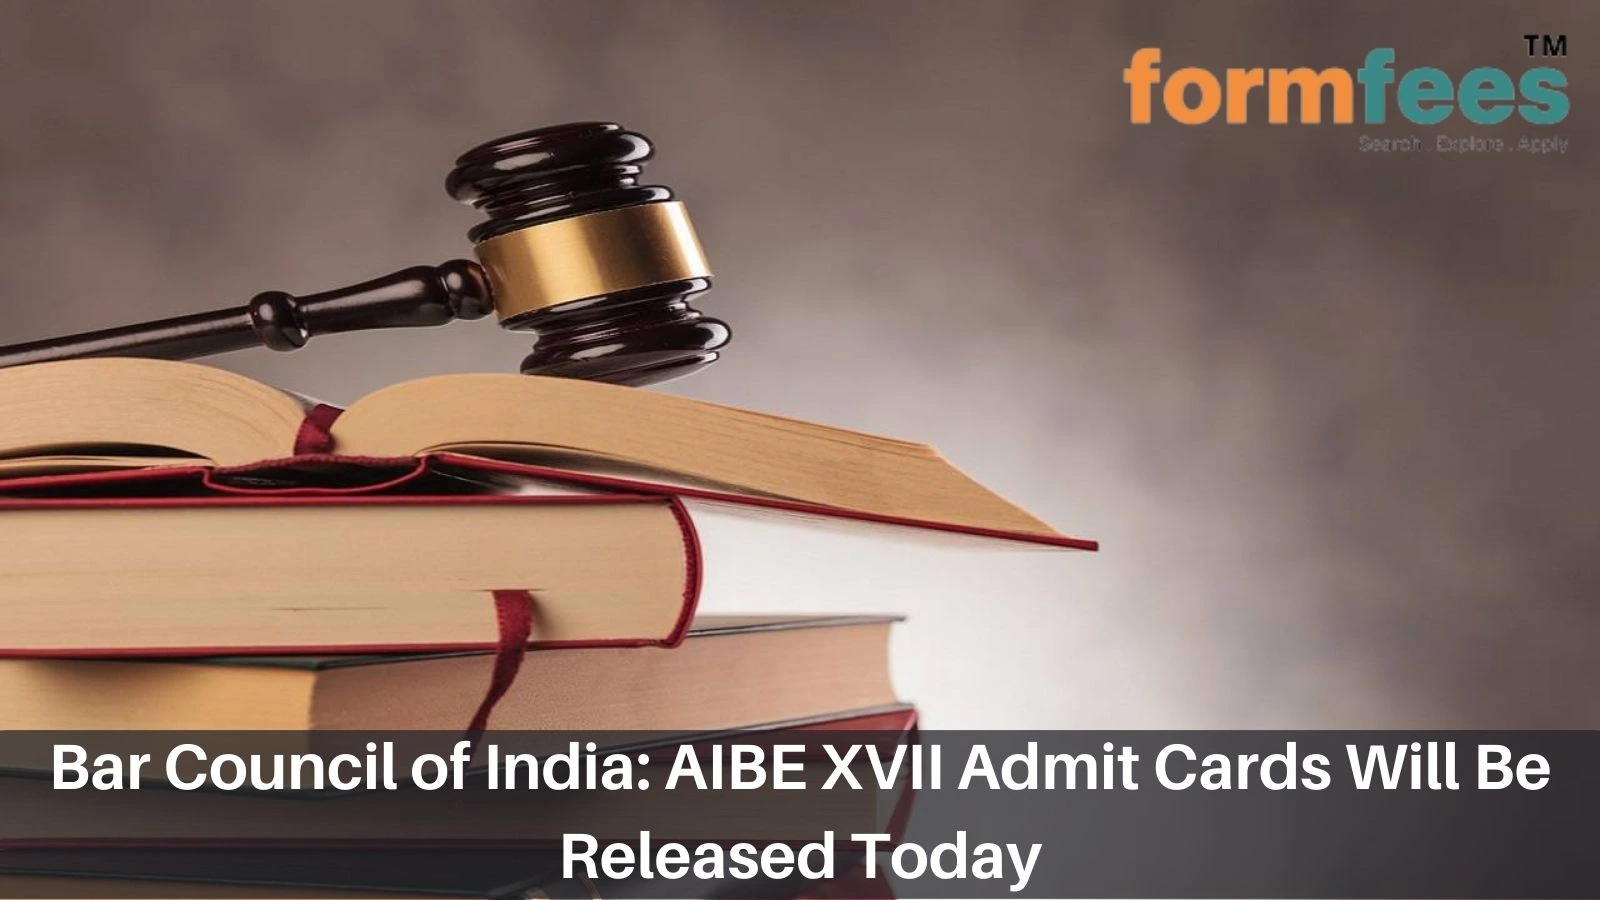 Bar Council of India: AIBE XVII Admit Cards Will Be Released Today